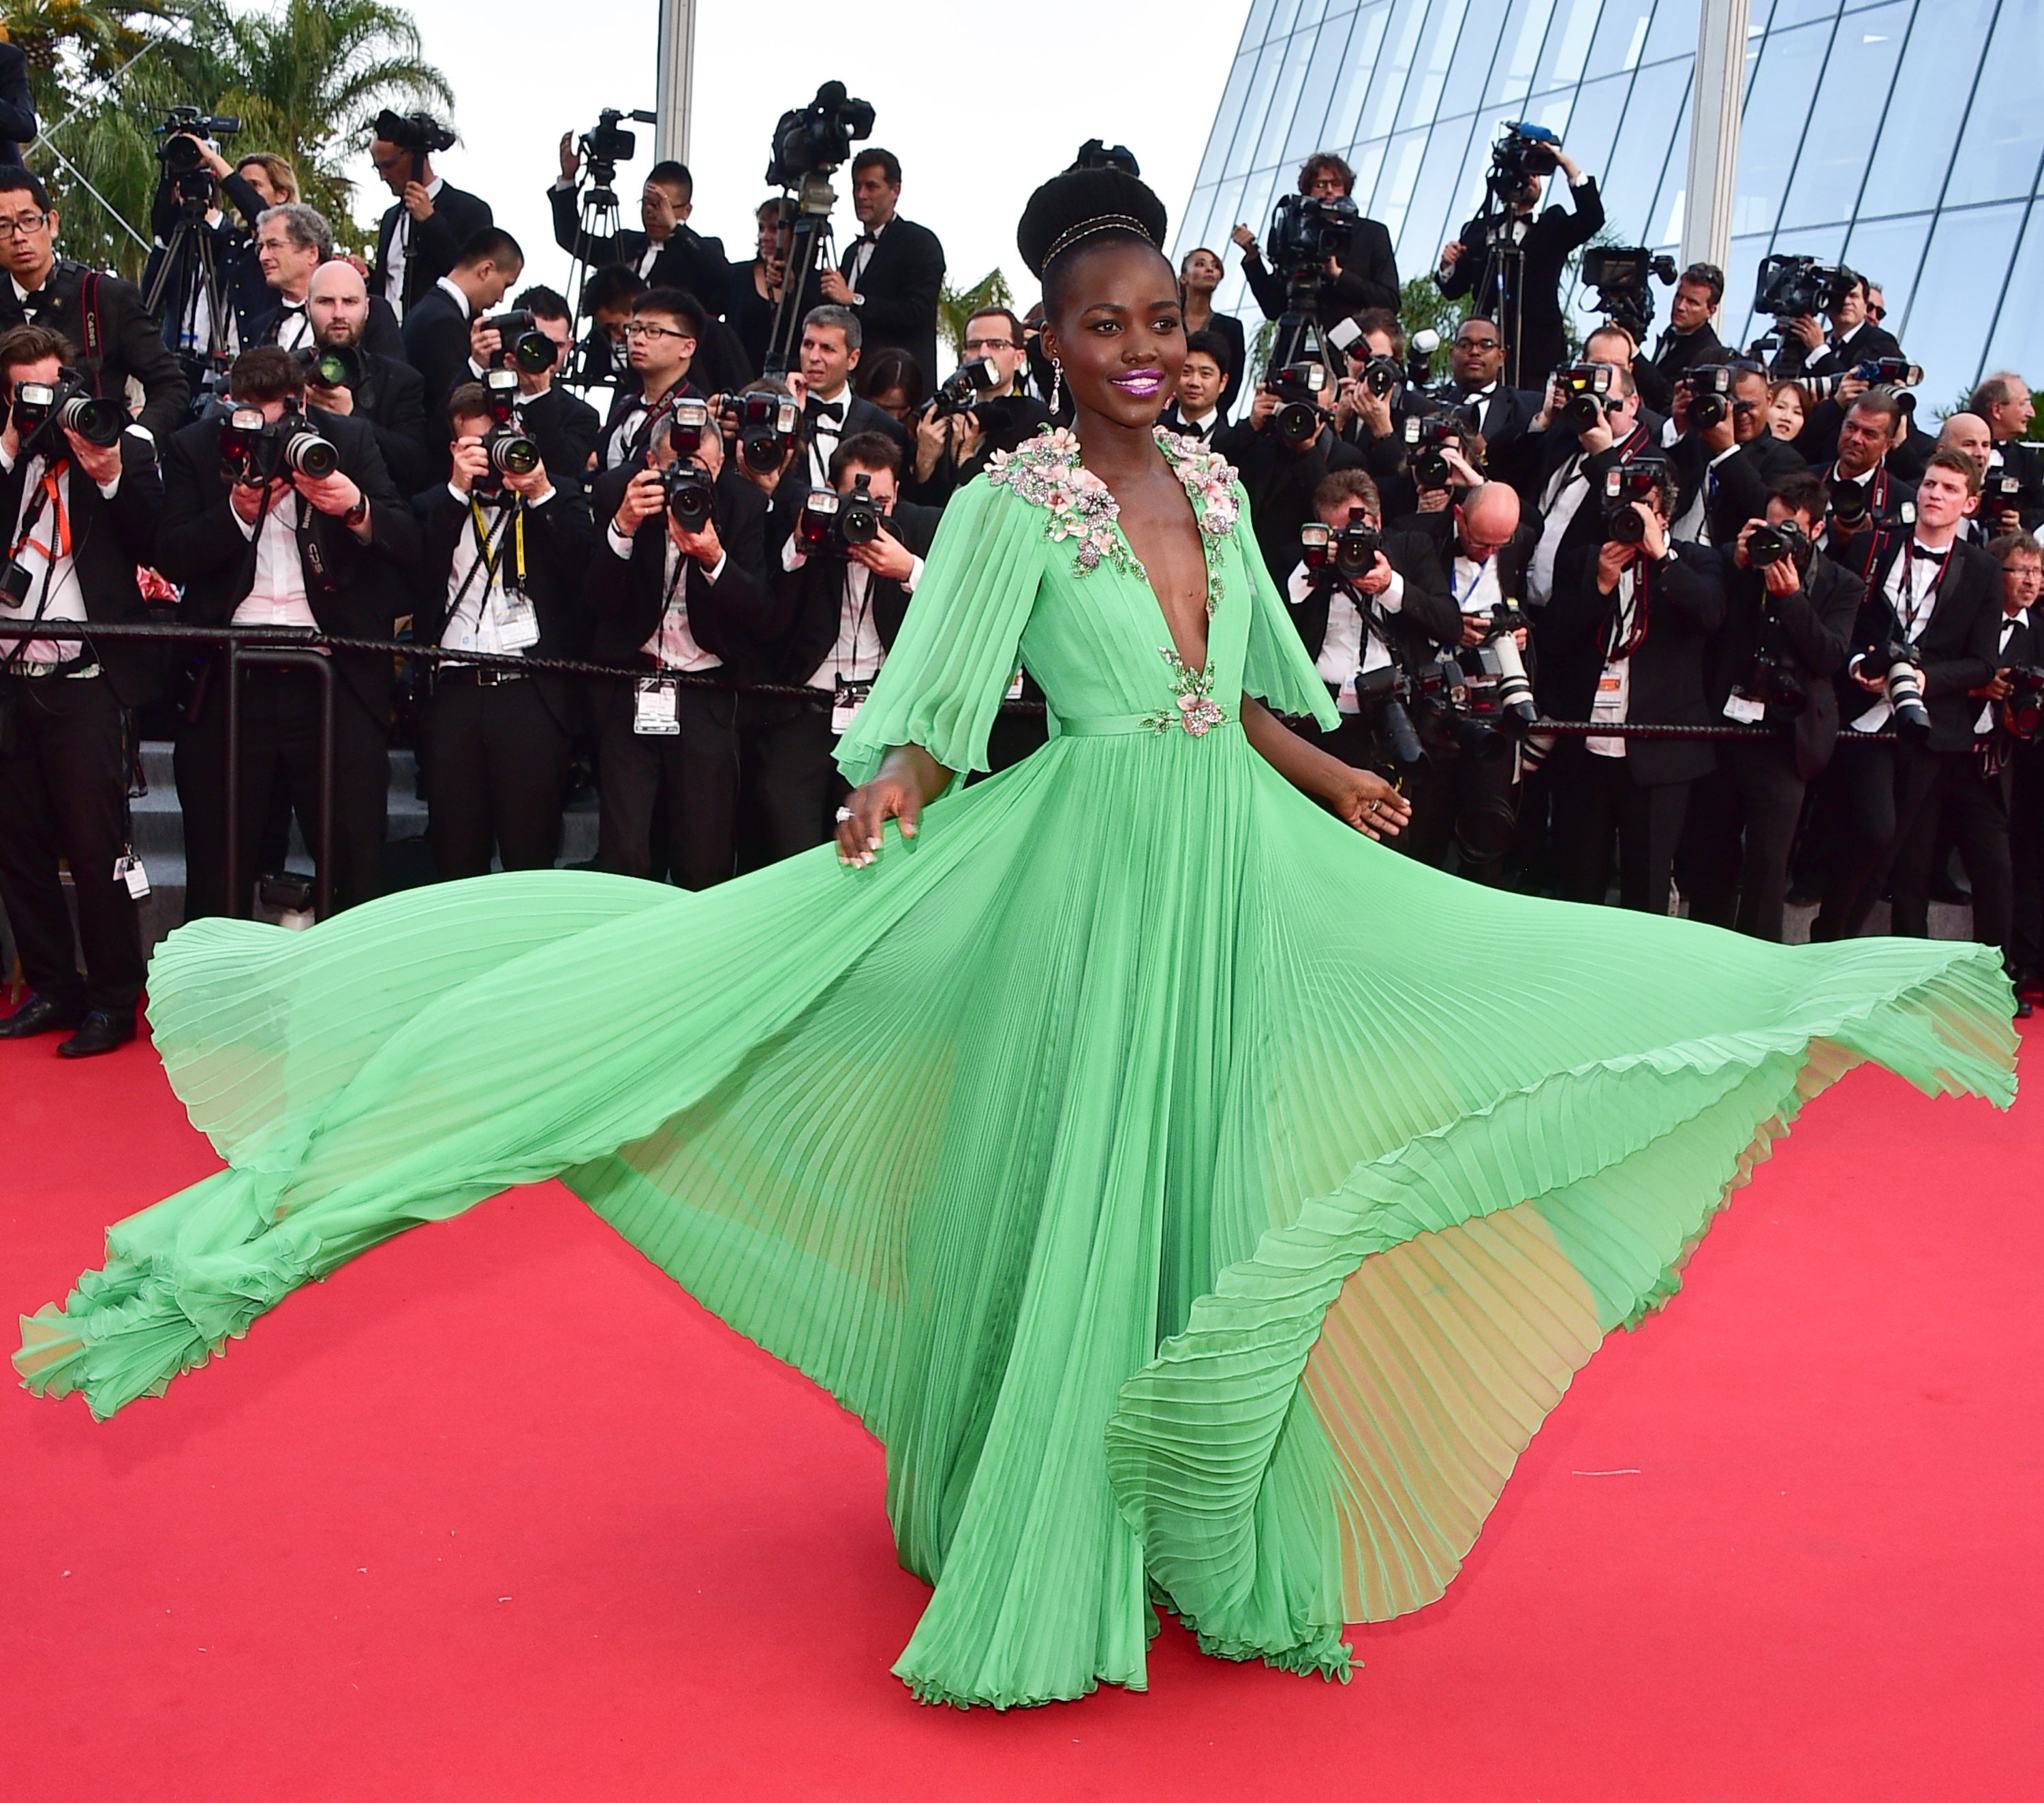 The 36 Best Bags Carried By Celebs at the 2018 Cannes Film